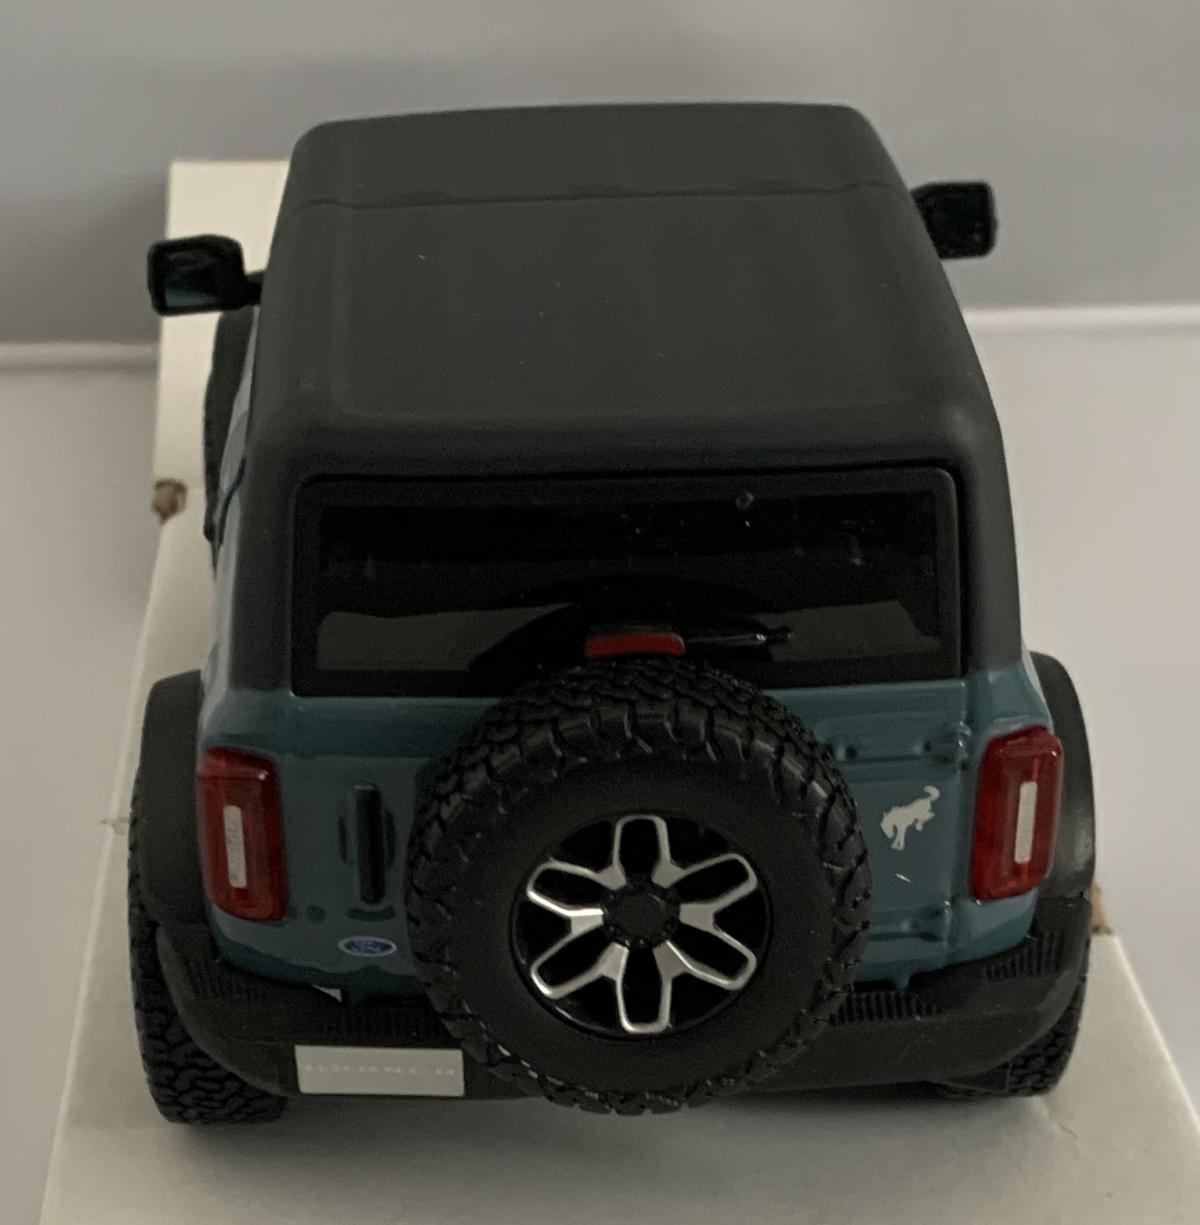 Ford Bronco Badlands 2021 in blue 1:24 scale model from Maisto